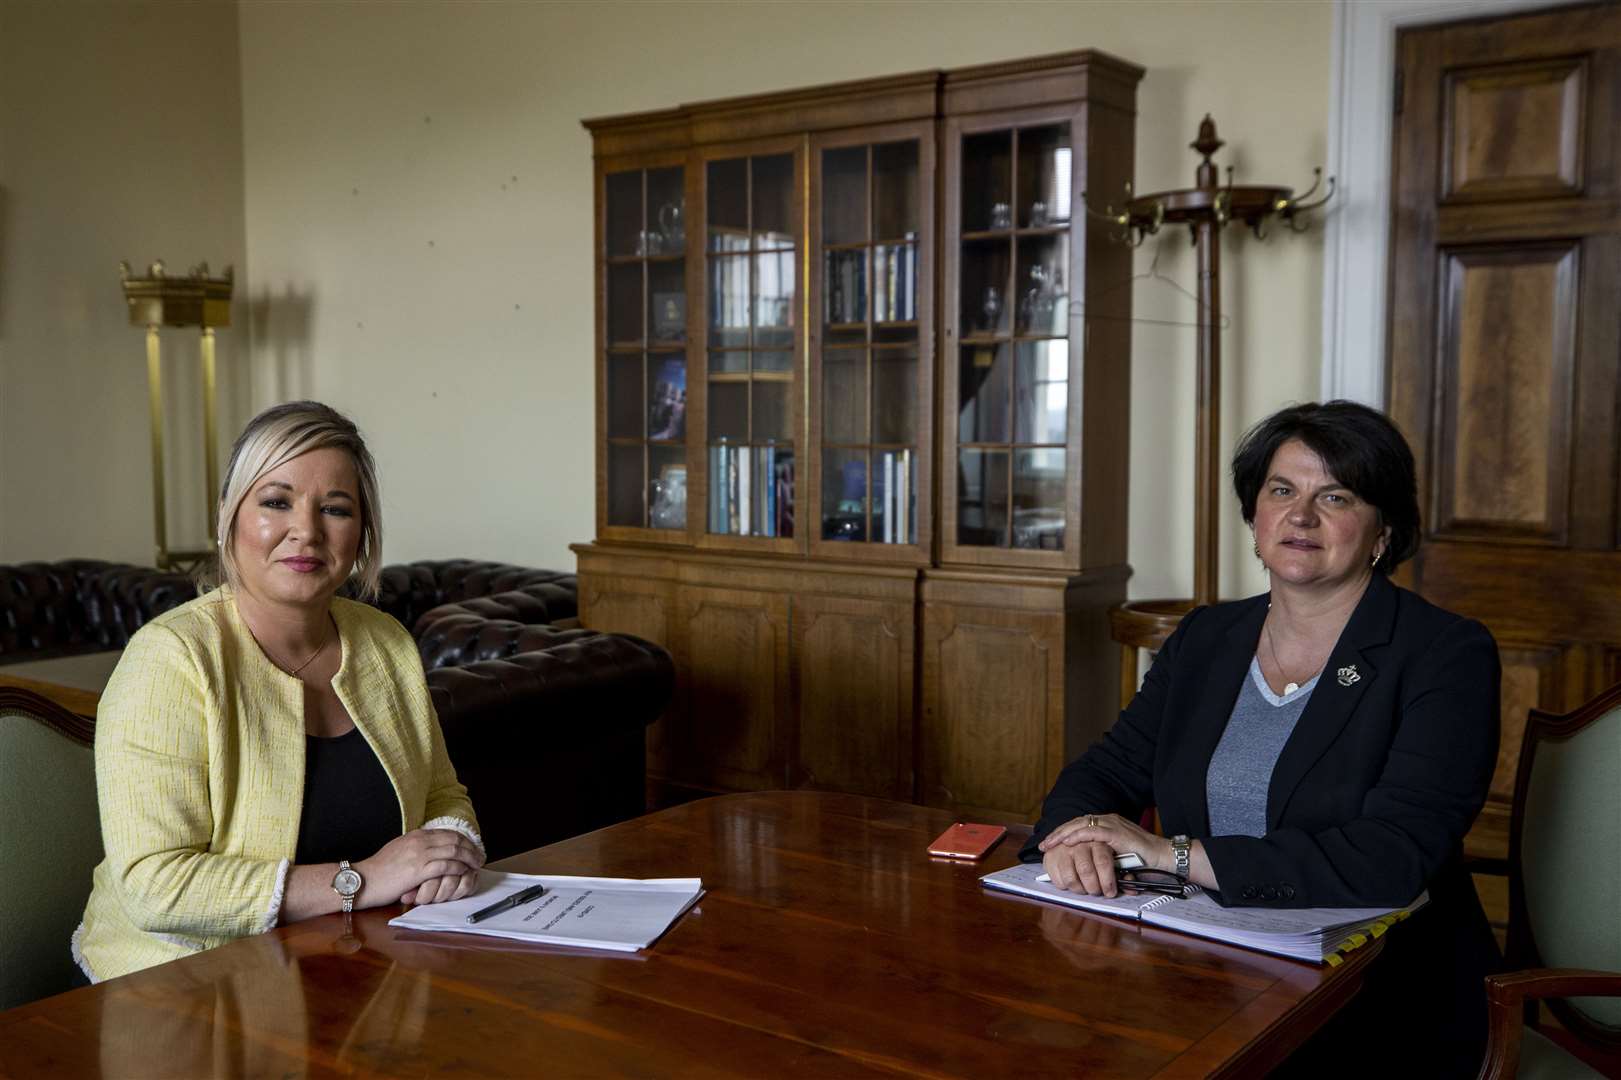 Dame Arlene Foster and Michelle O’Neill during the Covid pandemic (Liam McBurney/PA)